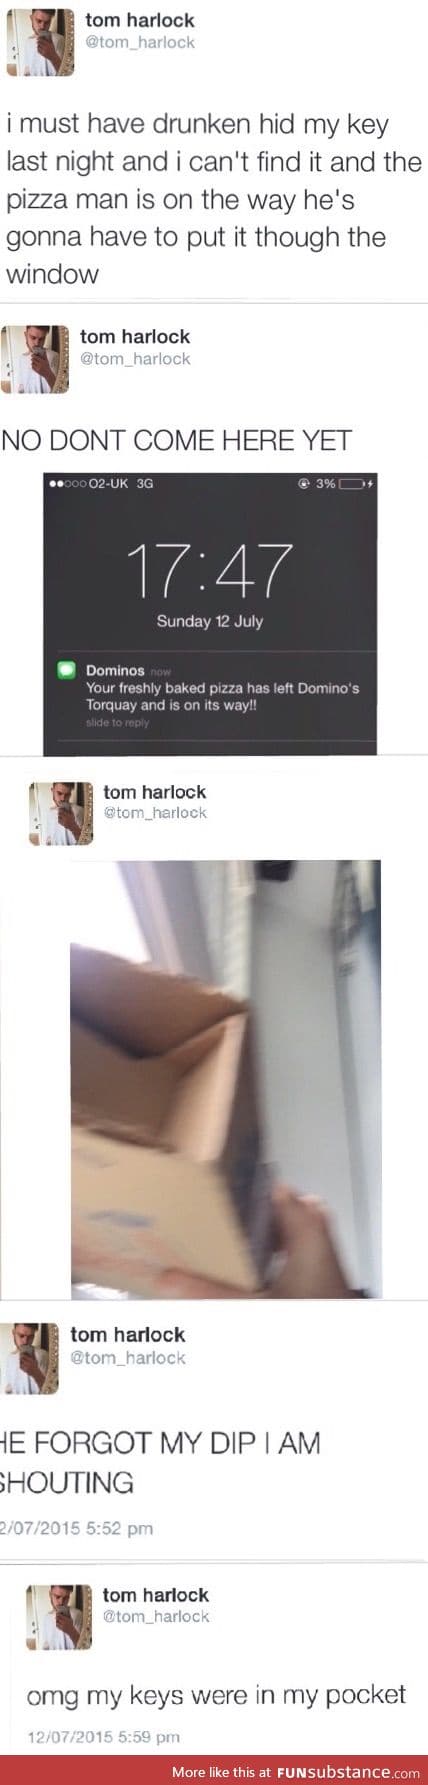 Pizza jokes can't be topped